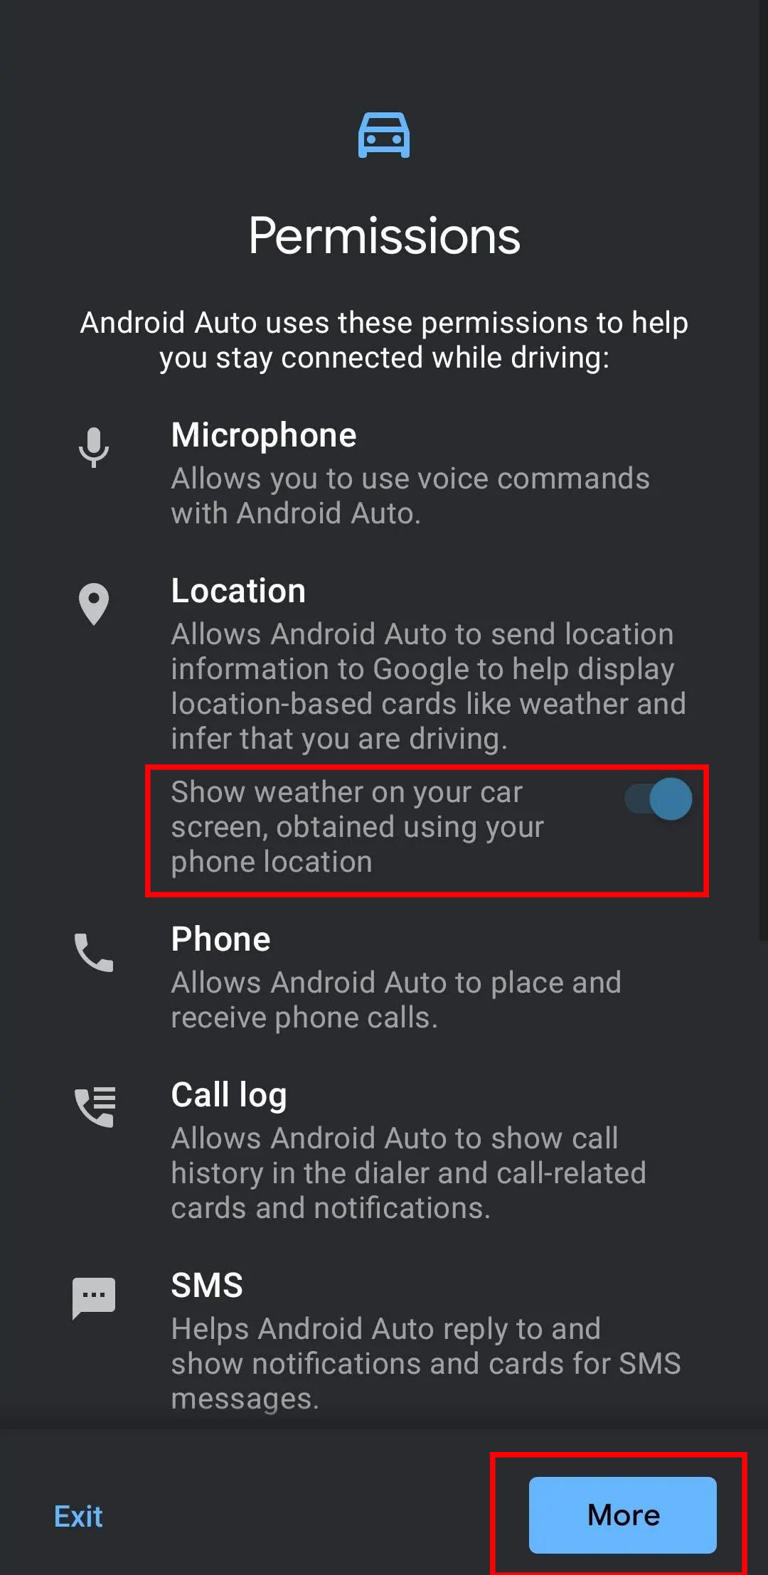 A permissions screen for Android Auto listing the permissions it uses to help the user stay connected while driving. Permissions requested include microphone, location, phone, call log, and SMS. 